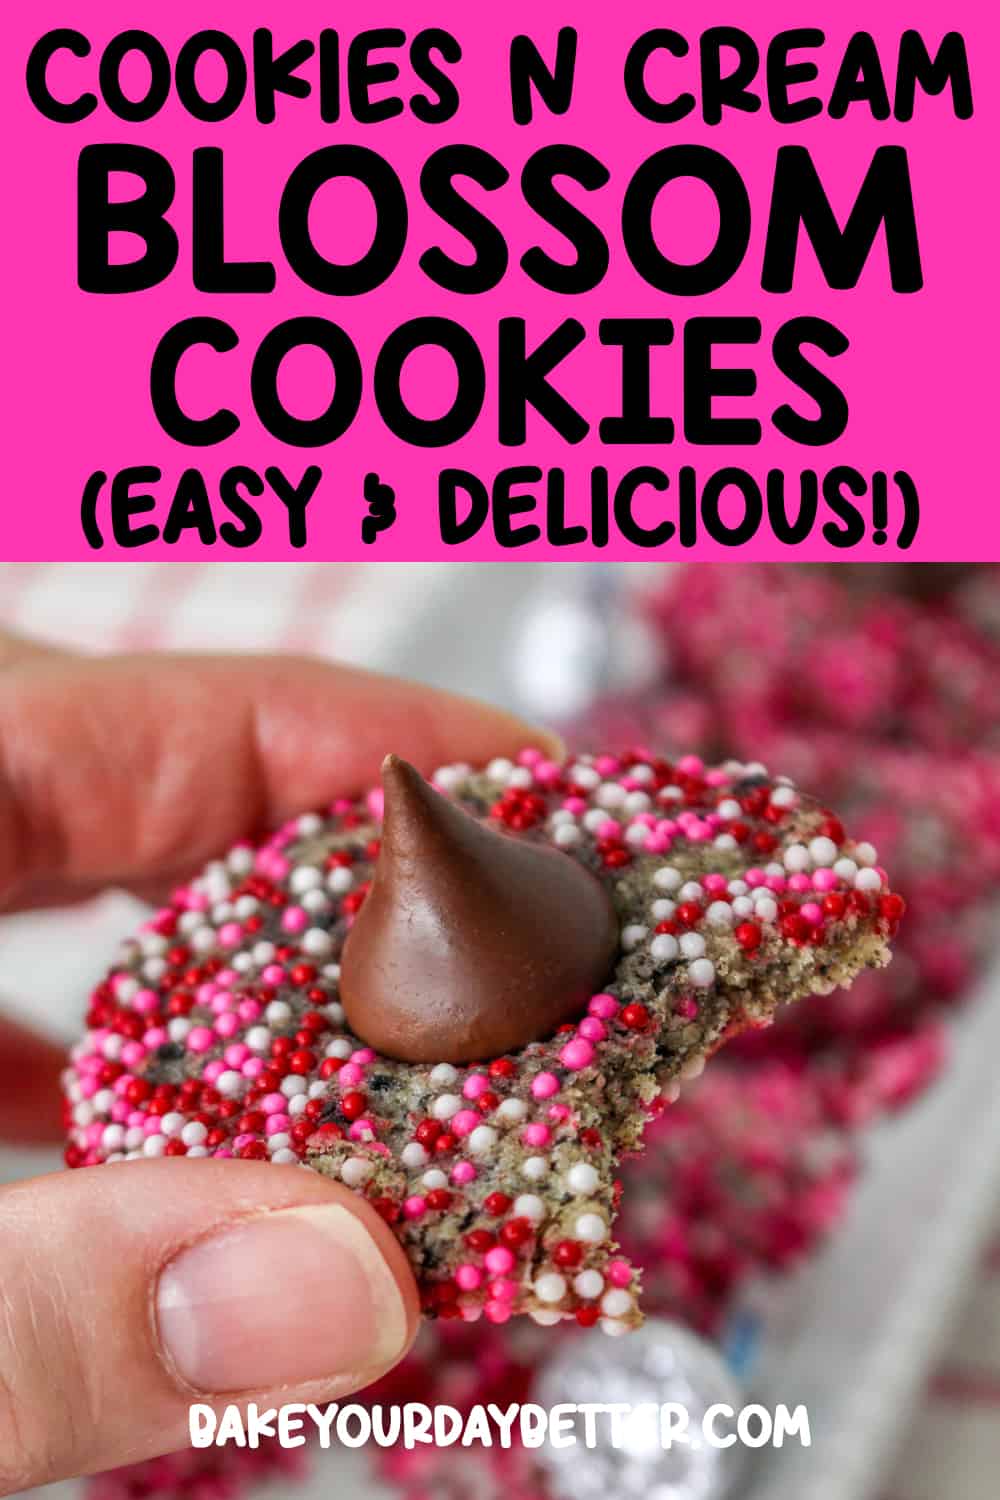 picture of hand holding blossom cookie with text overlay that says: cookies n cream blossom cookies (easy and delicious!)